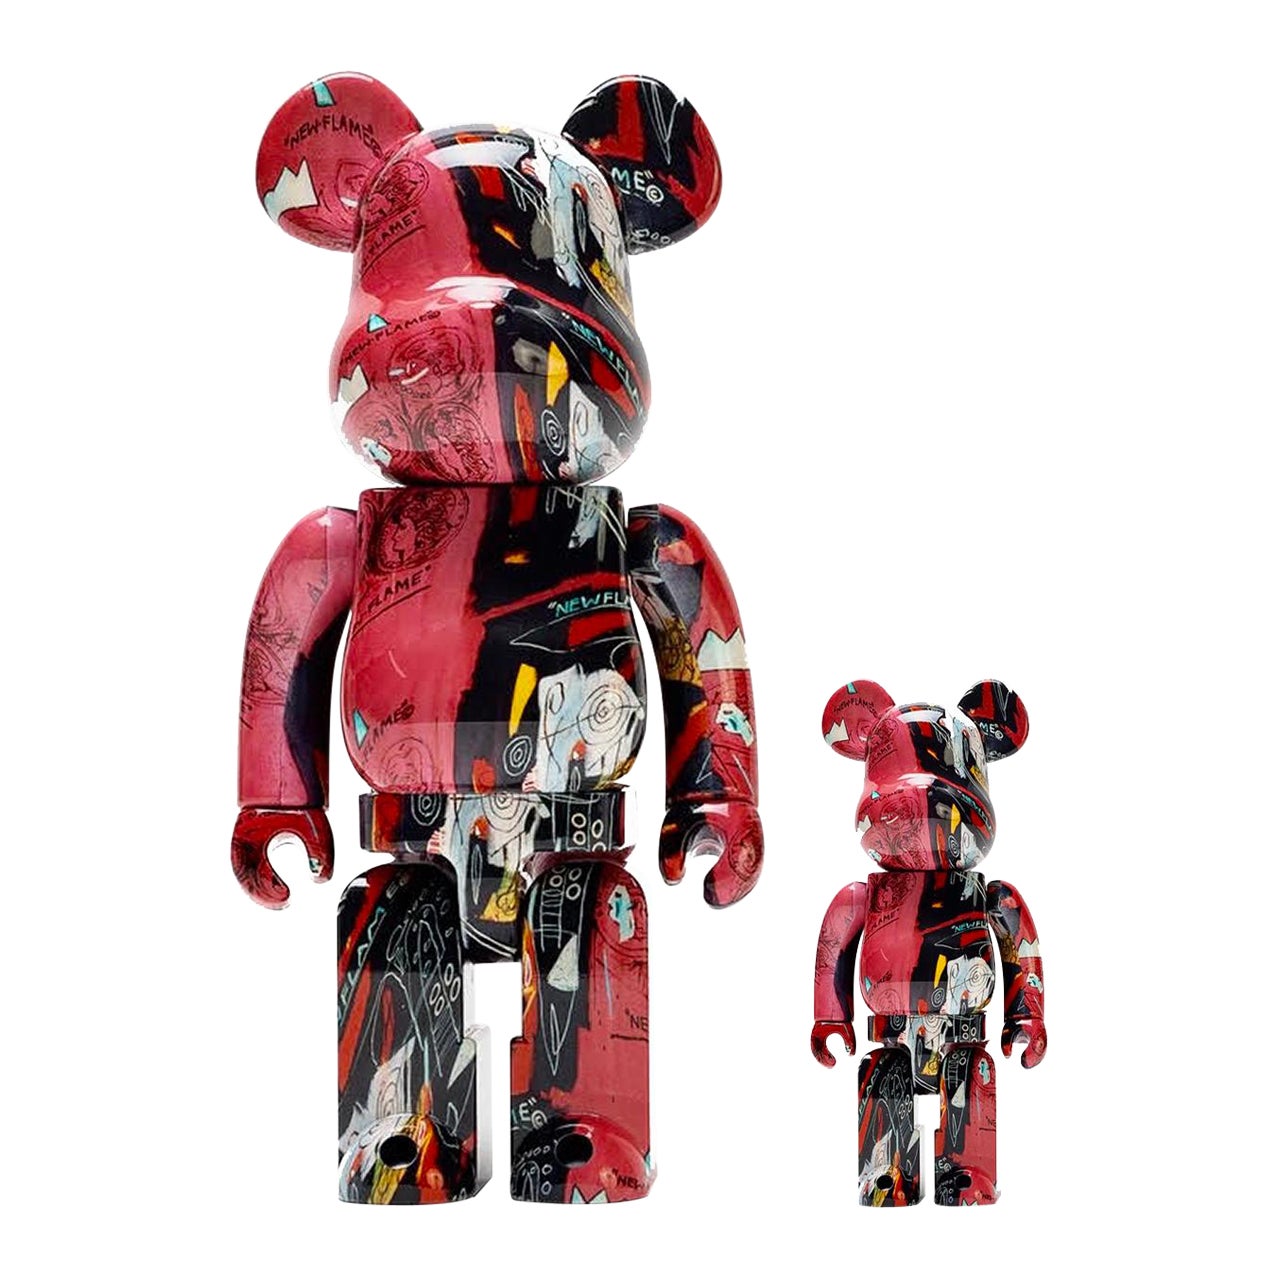 Be@rbrick x Warhol and Basquiat Estates 400% and 100% - Art by Jean-Michel Basquiat